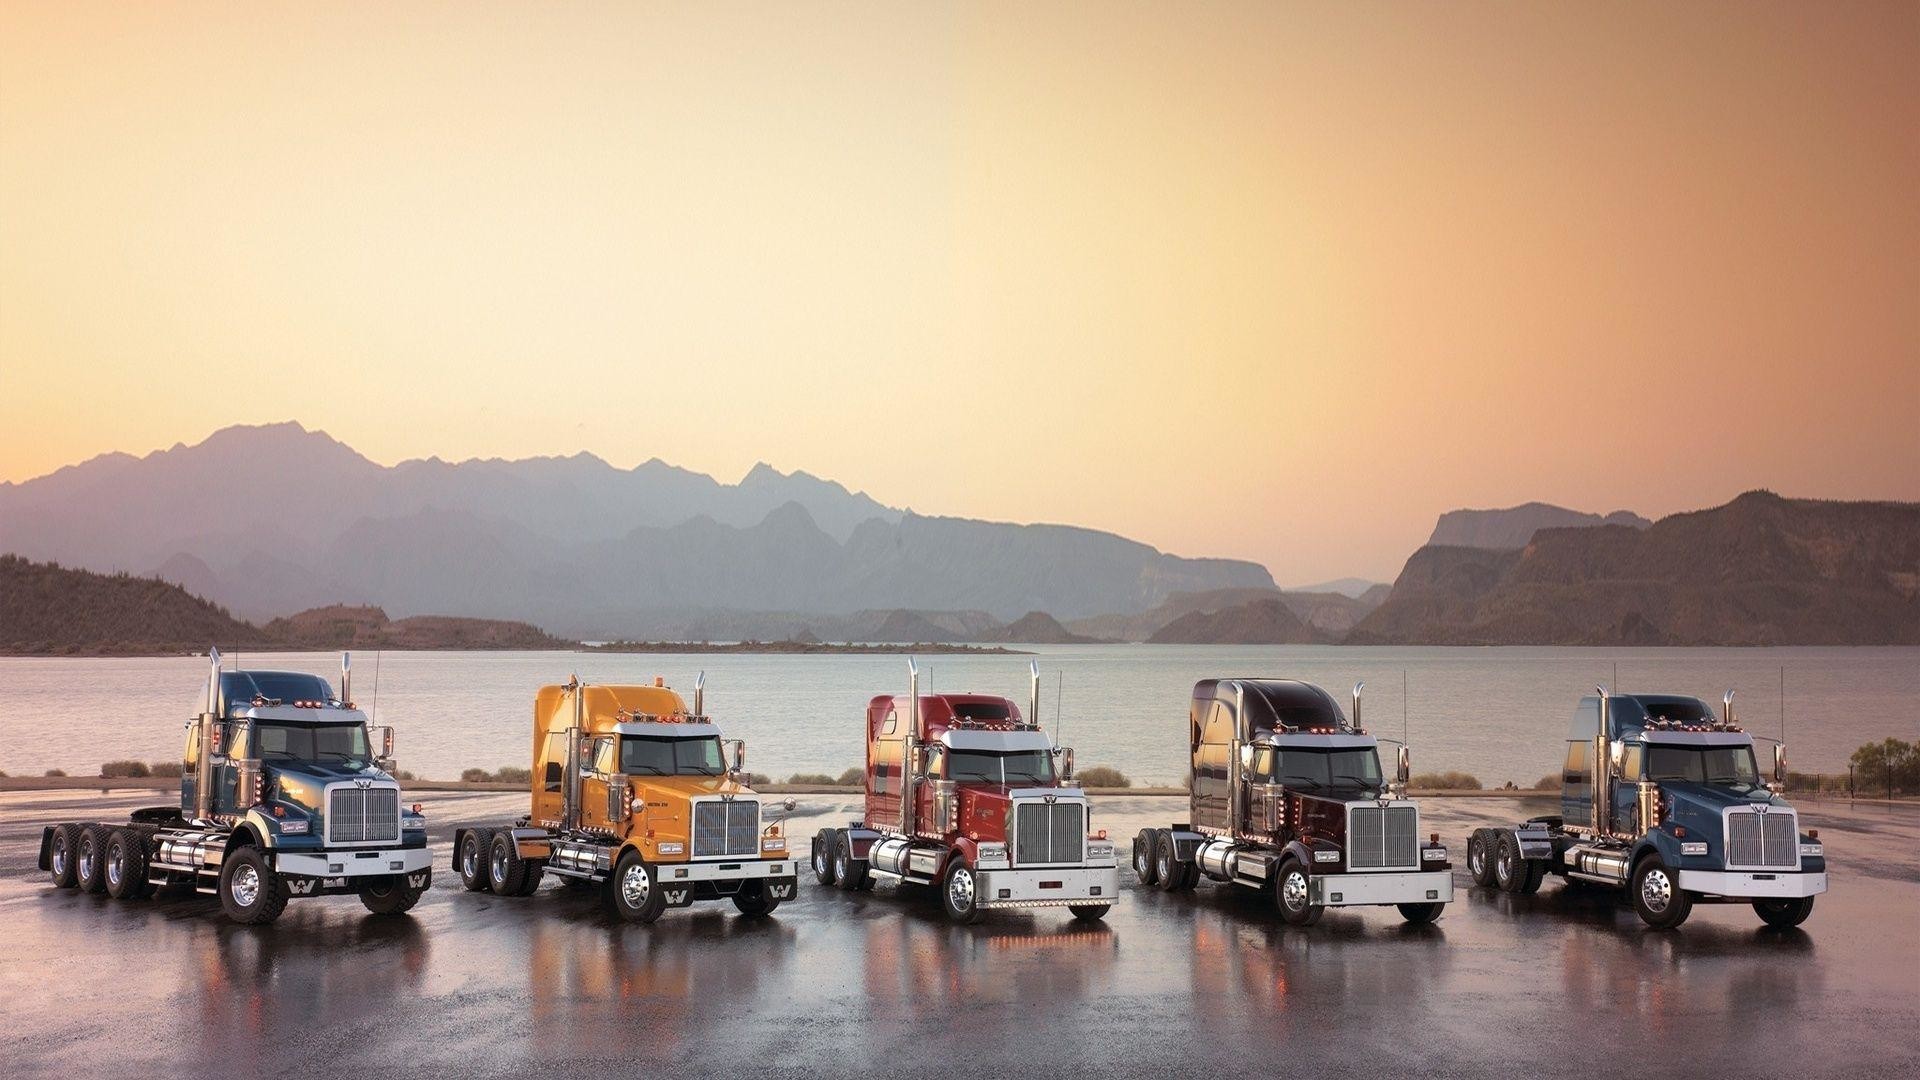 1920x1080 Free Download Semi Truck Wallpapers | Wallpapers, Backgrounds .